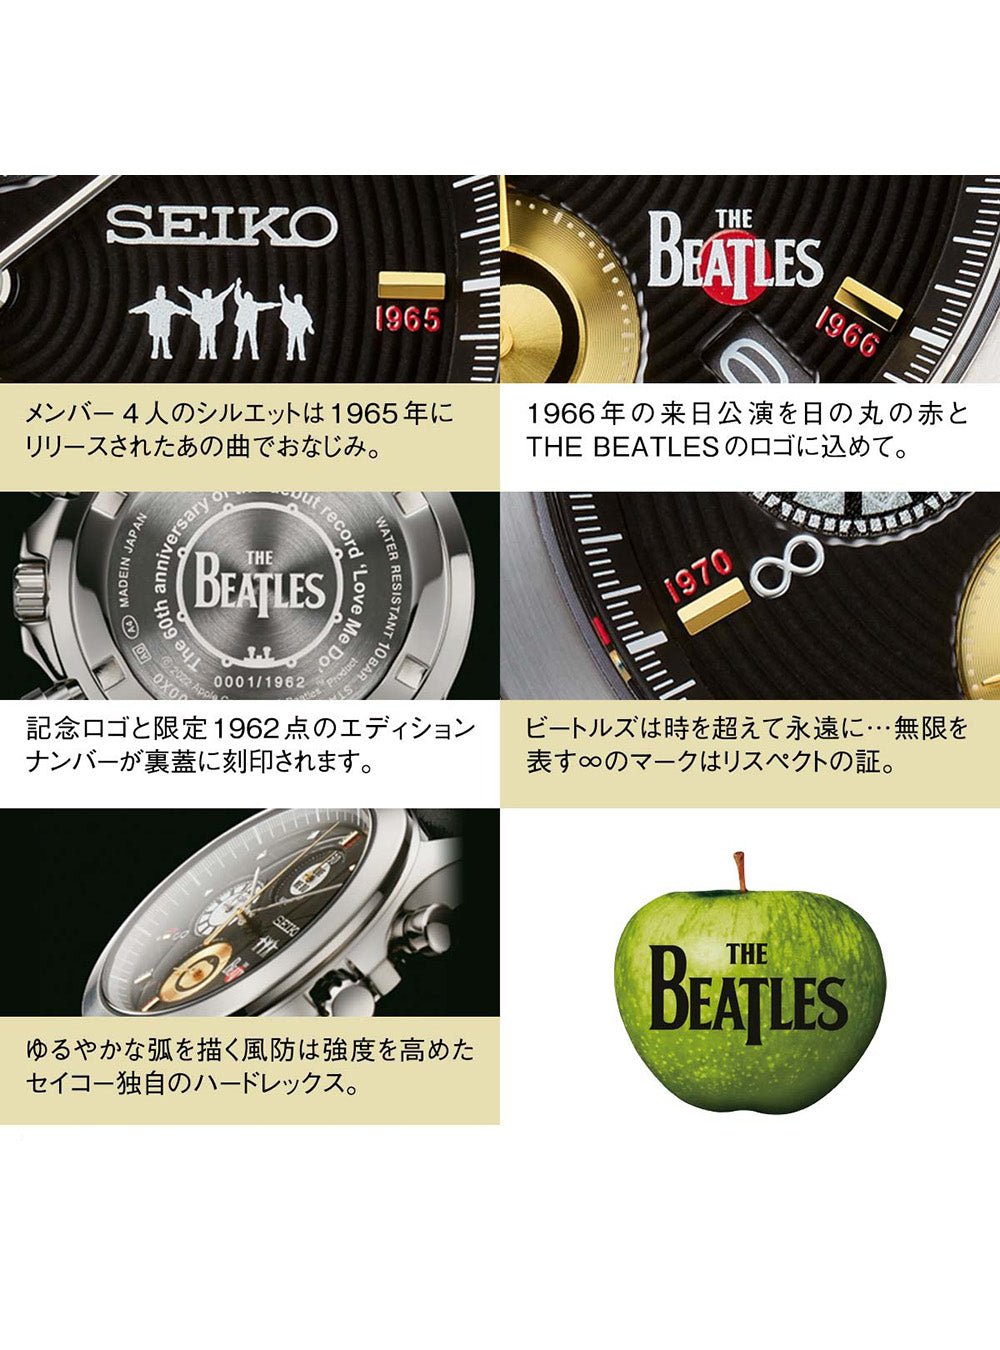 SEIKO x THE BEATLES THE 60TH ANNIVERSARY OF THE DEBUT RECORD 'LOVE ME DO'  LIMITED EDITION MADE IN JAPAN